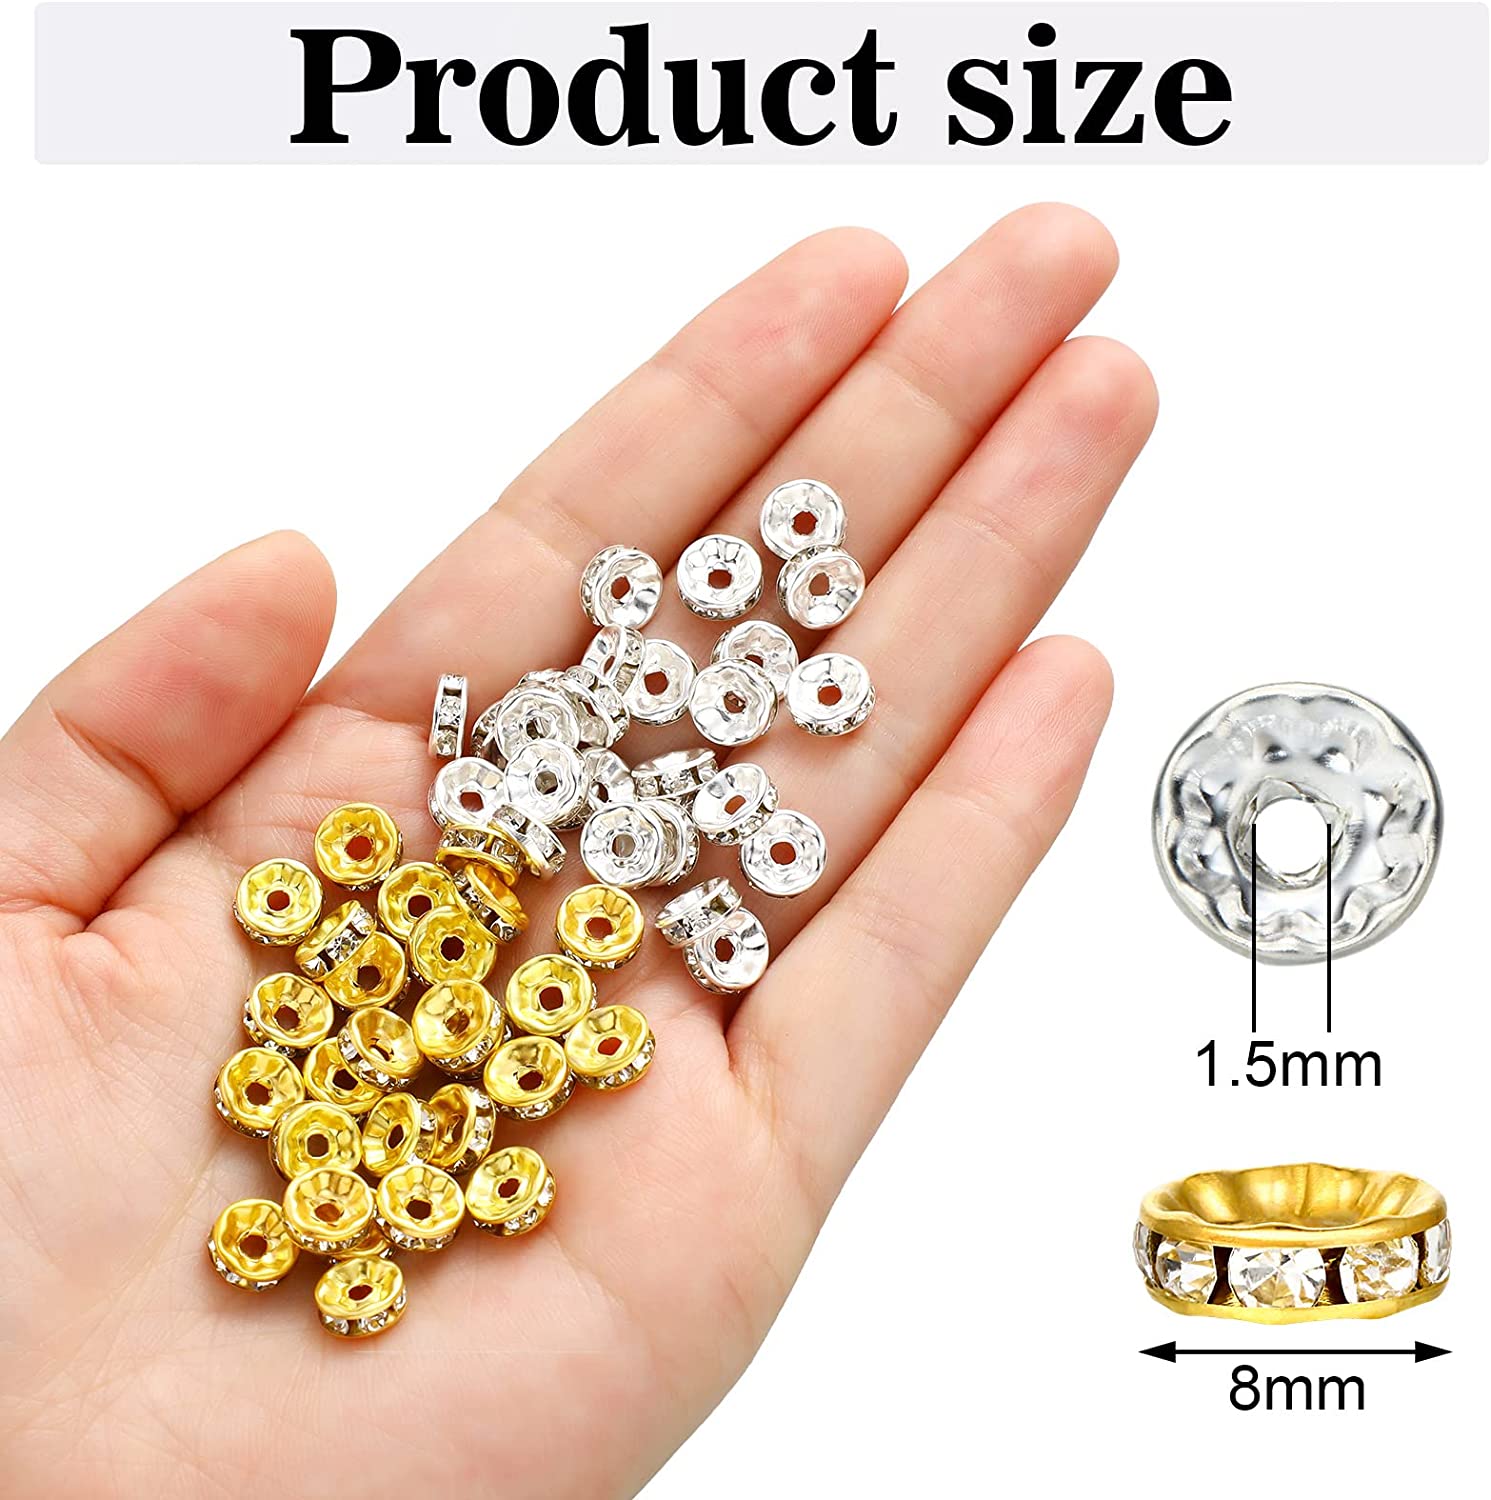 800 Pieces 8mm Round Rondelle Spacer Beads Crystal Rhinestone